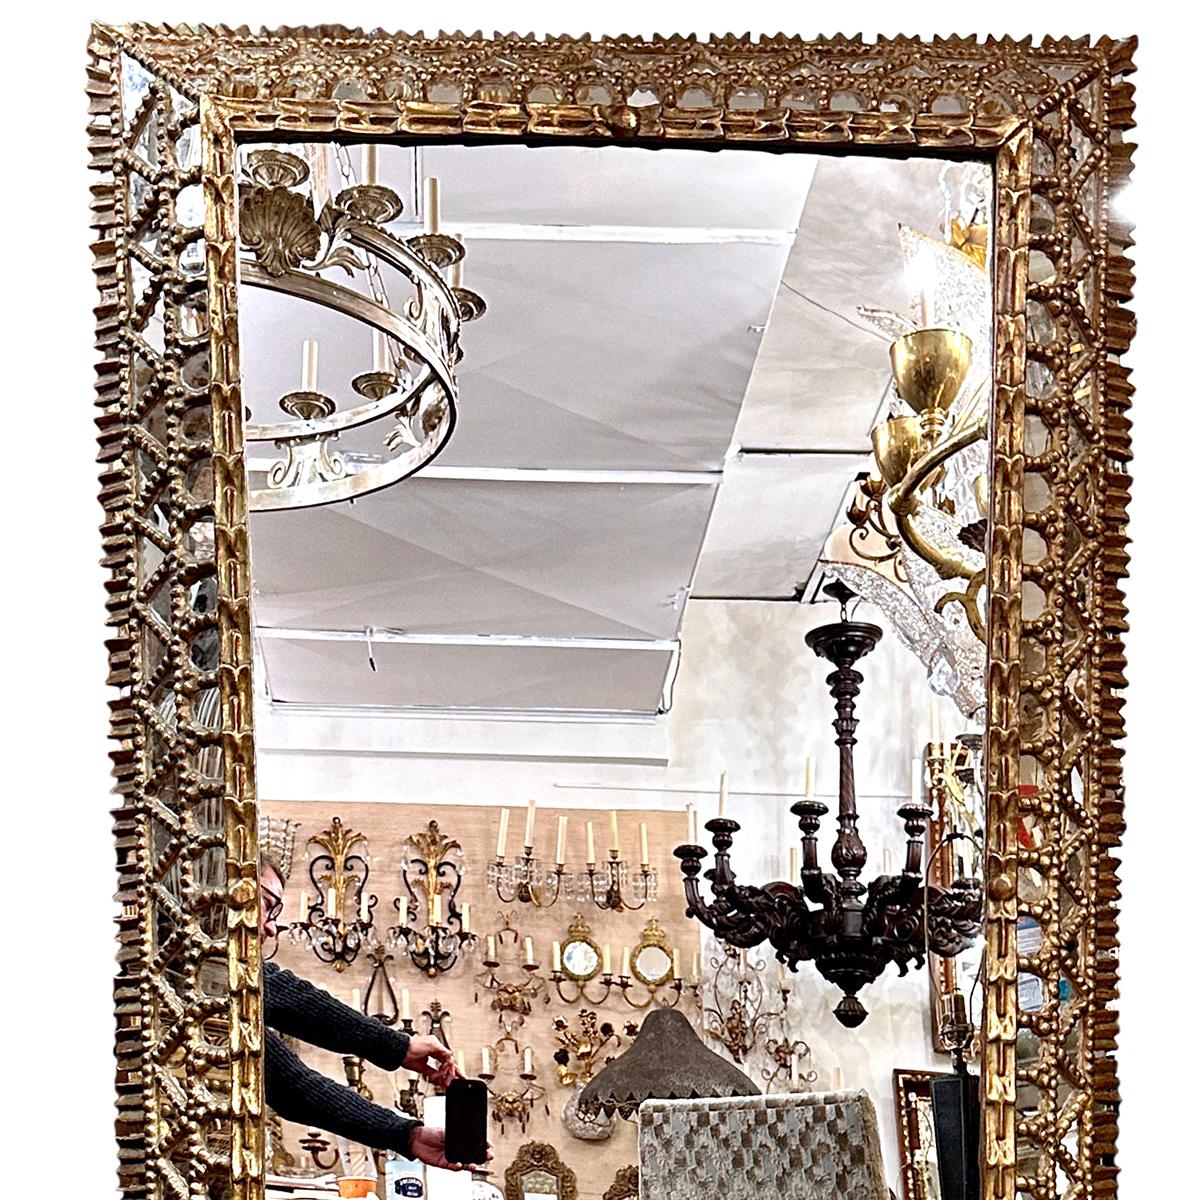 A circa 1900 Spanish gilt wood mirror with mirror insets.

Measurements:
Height: 67